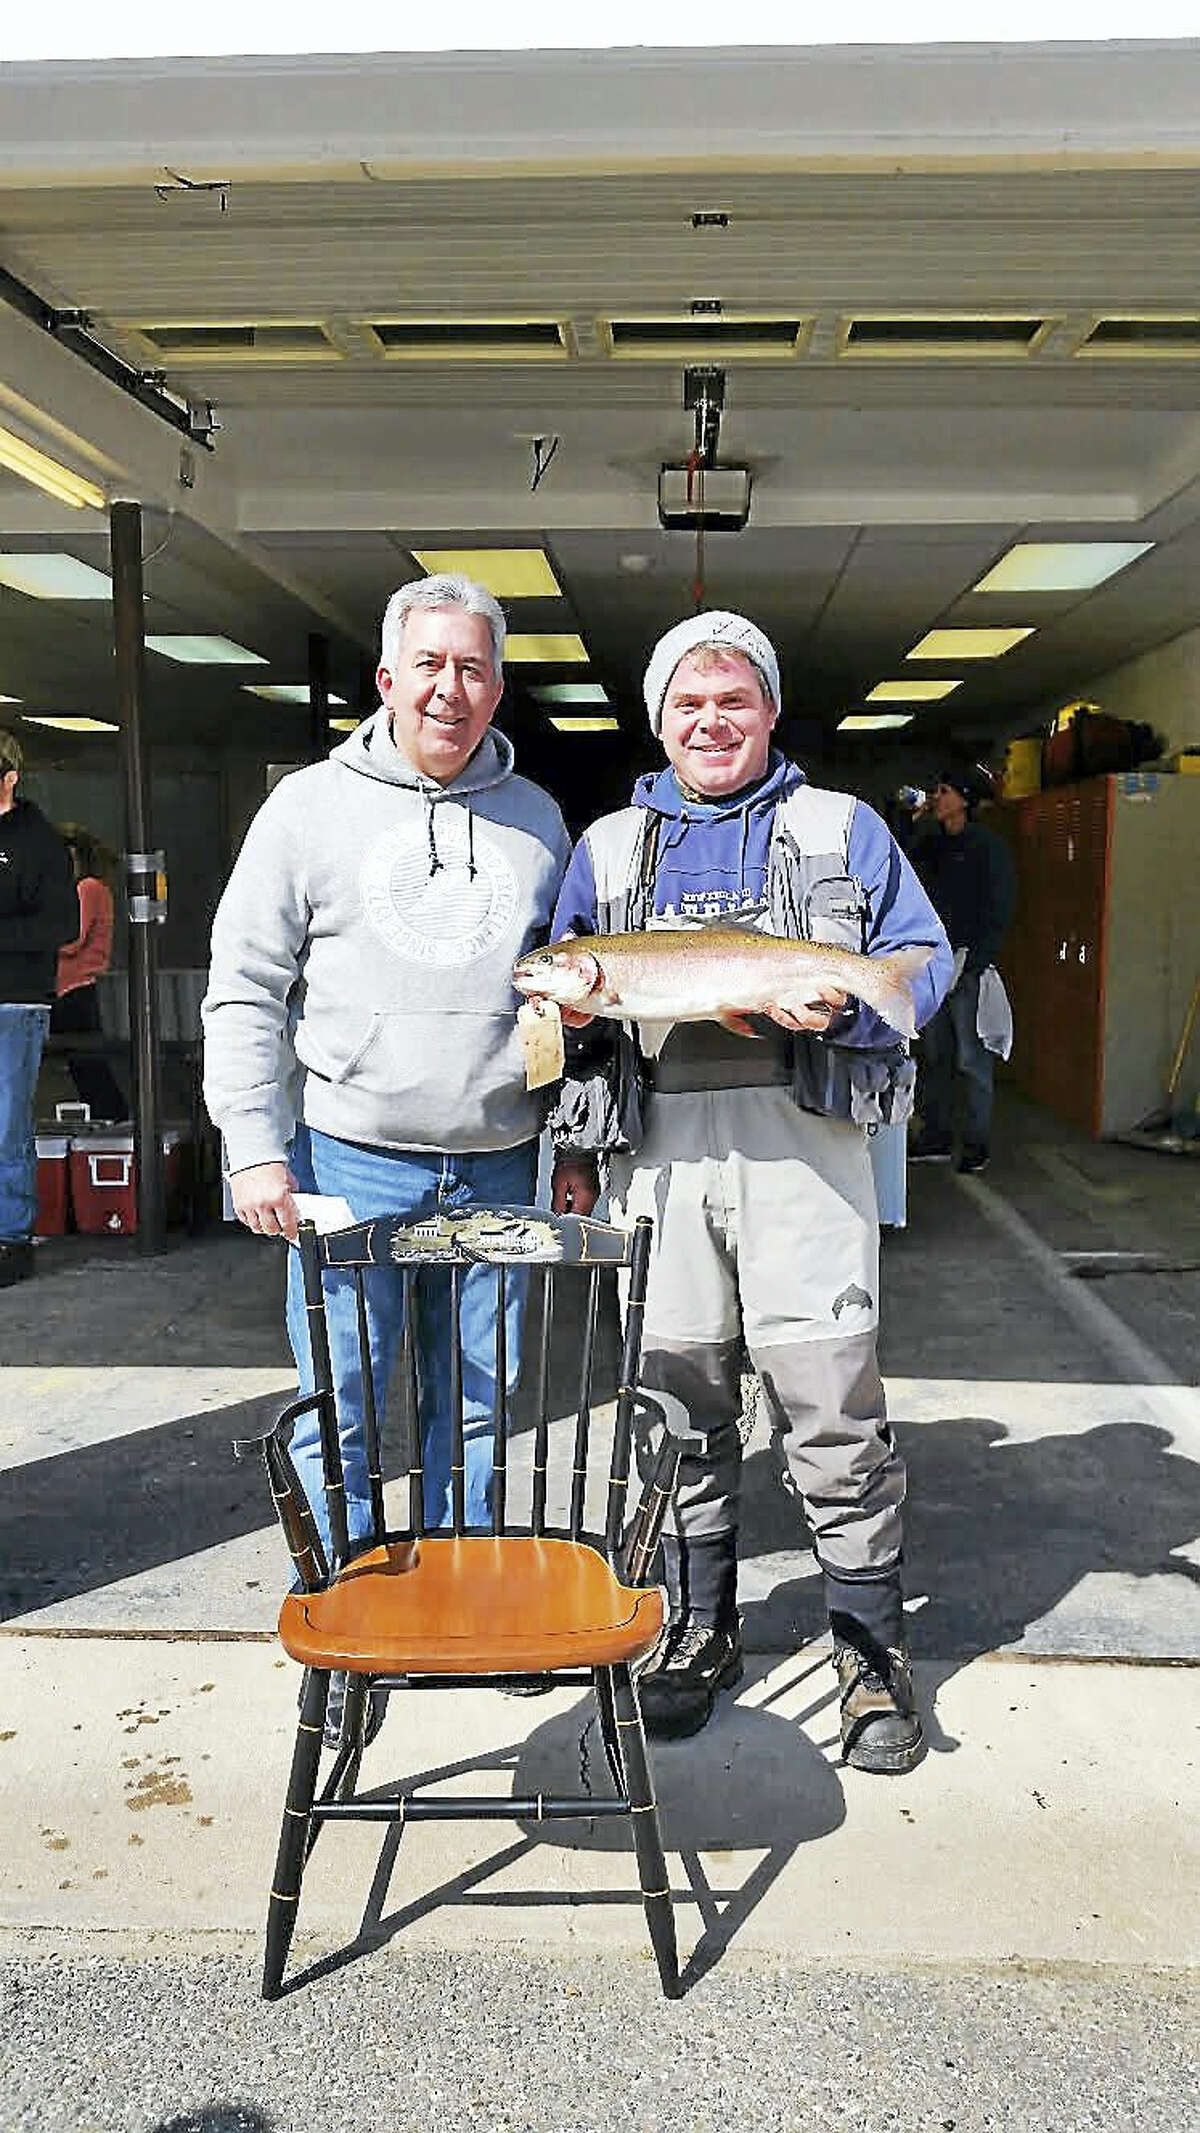 Brandon D’Angelo, 34, of Barkhamsted shows off his 24 ½-inch rainbow trout and his prize, a customized wooden Hitchcock chair, along with his father, Gary D’Angelo, of Winsted at the 67th annual Riverton Fishing Derby on the West branch of the Farmington River near the Old Riverton Inn at 436 E. River Road in Riverton Saturday.